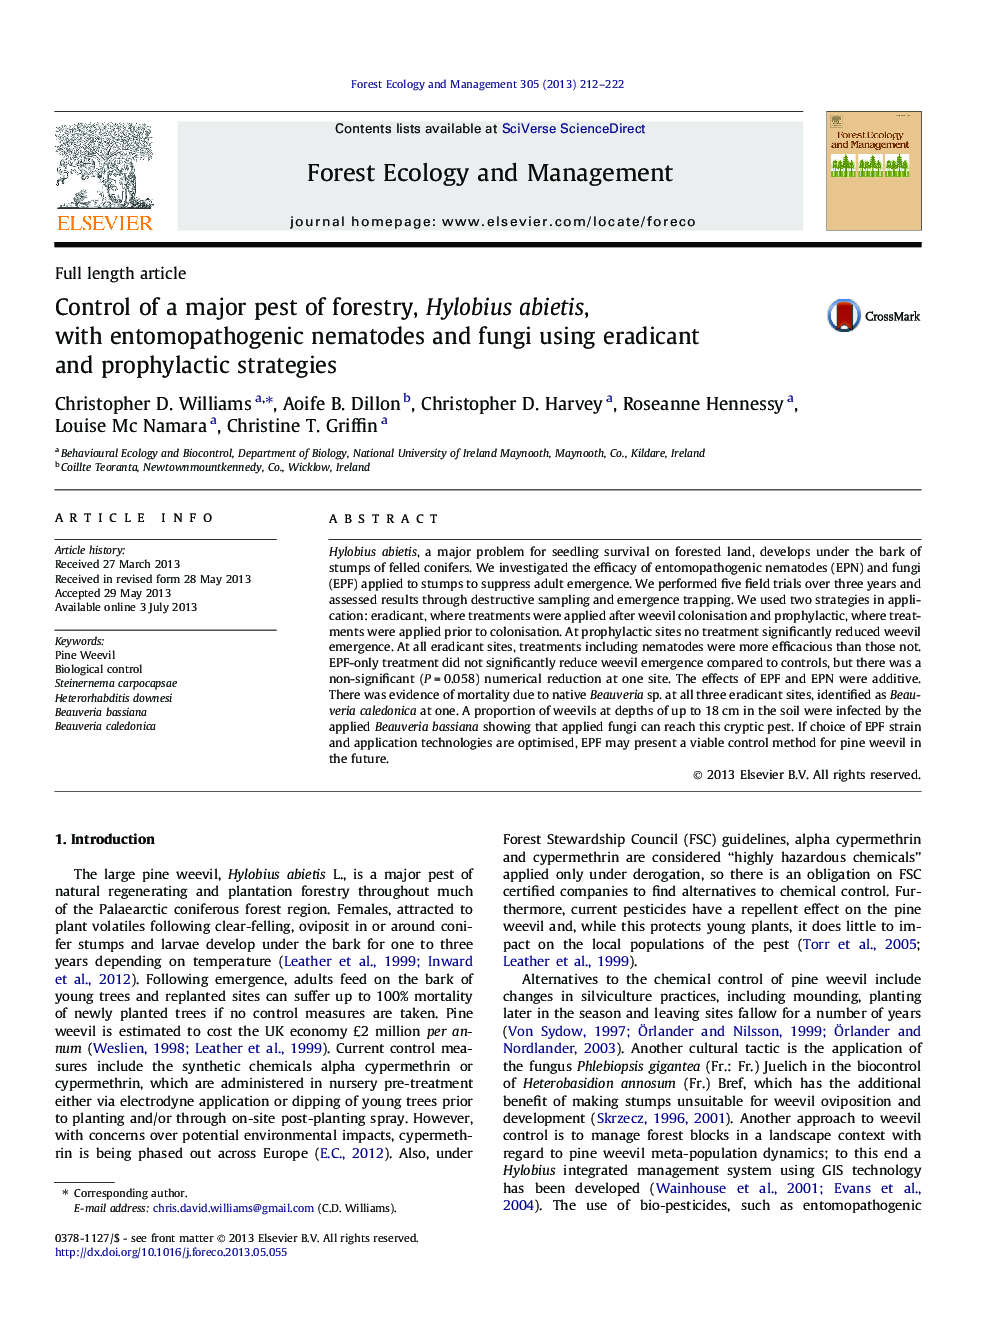 Control of a major pest of forestry, Hylobius abietis, with entomopathogenic nematodes and fungi using eradicant and prophylactic strategies